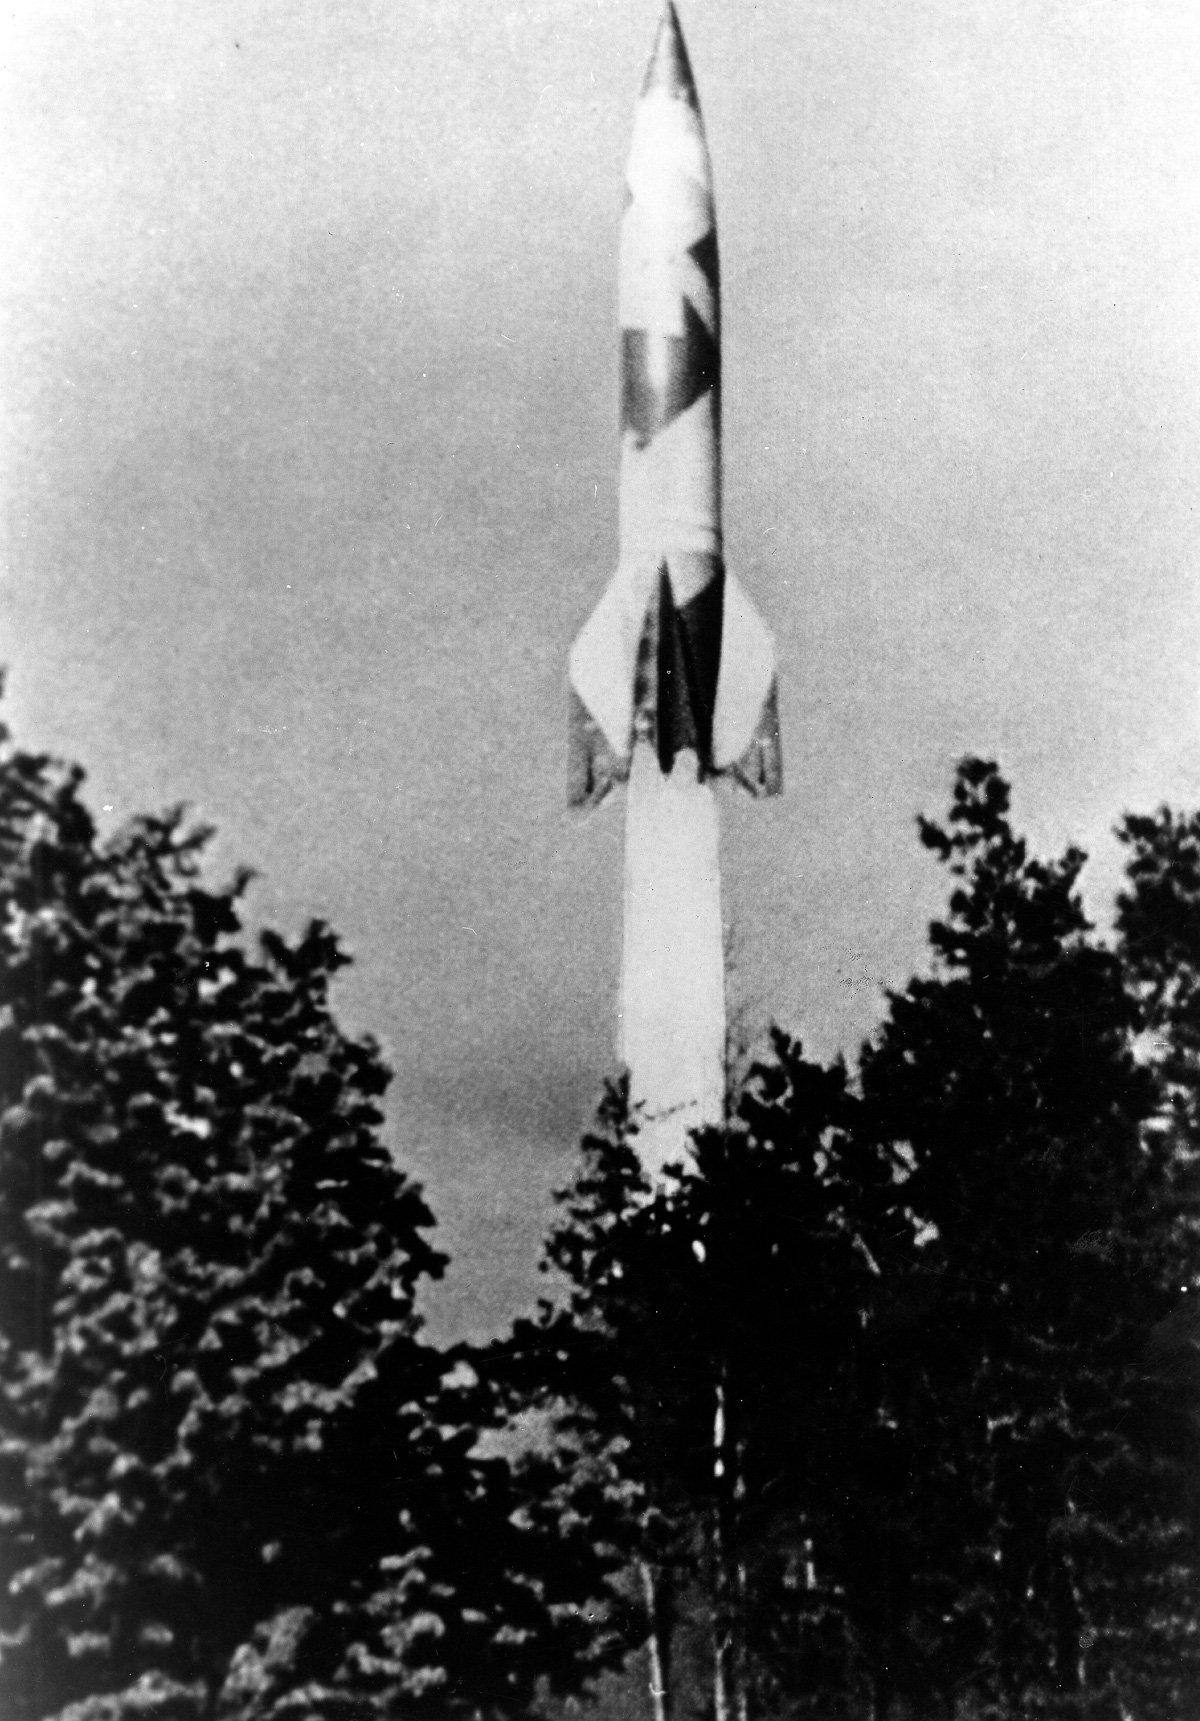 (GERMANY OUT) GERMAN V-2 ROCKET. Launch of a German V-2 rocket, at the test site at PeenemÃ¼nde on Germany's Baltic coast, during World War II. (Photo by ullstein bild/ullstein bild via Getty Images)